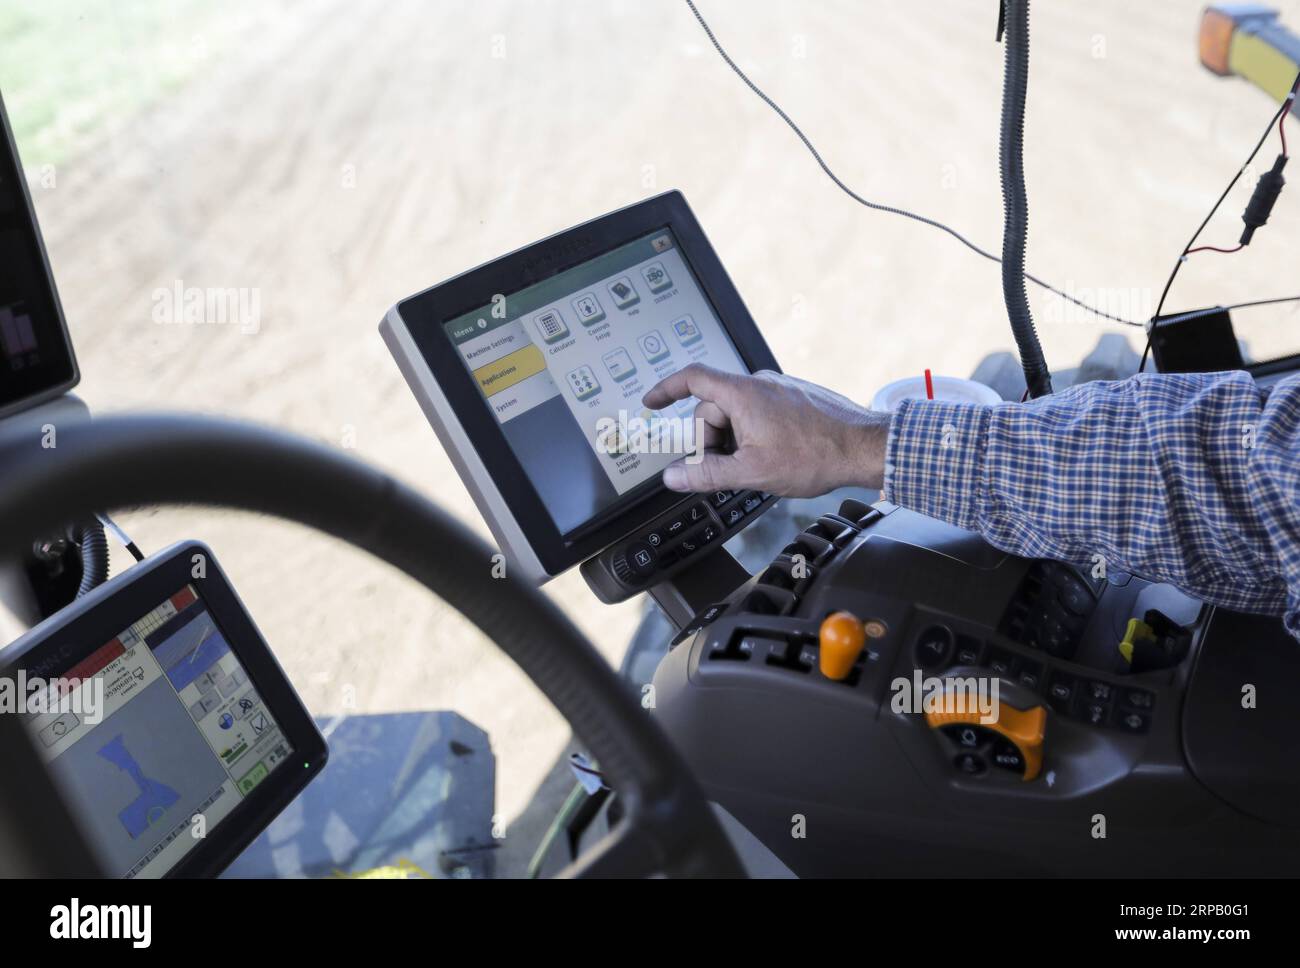 (190523) -- IOWA, May 23, 2019 (Xinhua) -- Bill Pellett s son Bret operates a planter machine at their family farm in Atlantic of Cass county, Iowa, the United States, April 24, 2019. Bill Pellett knows how to farm, but just like most of his peers across the country, the 71-year-old farmer is feeling less assured of what he could get from a new year of farming, as there appears to be no quick resolution of the year-long trade disputes between the United States and China. TO GO WITH Spotlight: Leading U.S. farming state enters new crop season amid uncertainty over trade prospects with China (Xi Stock Photo